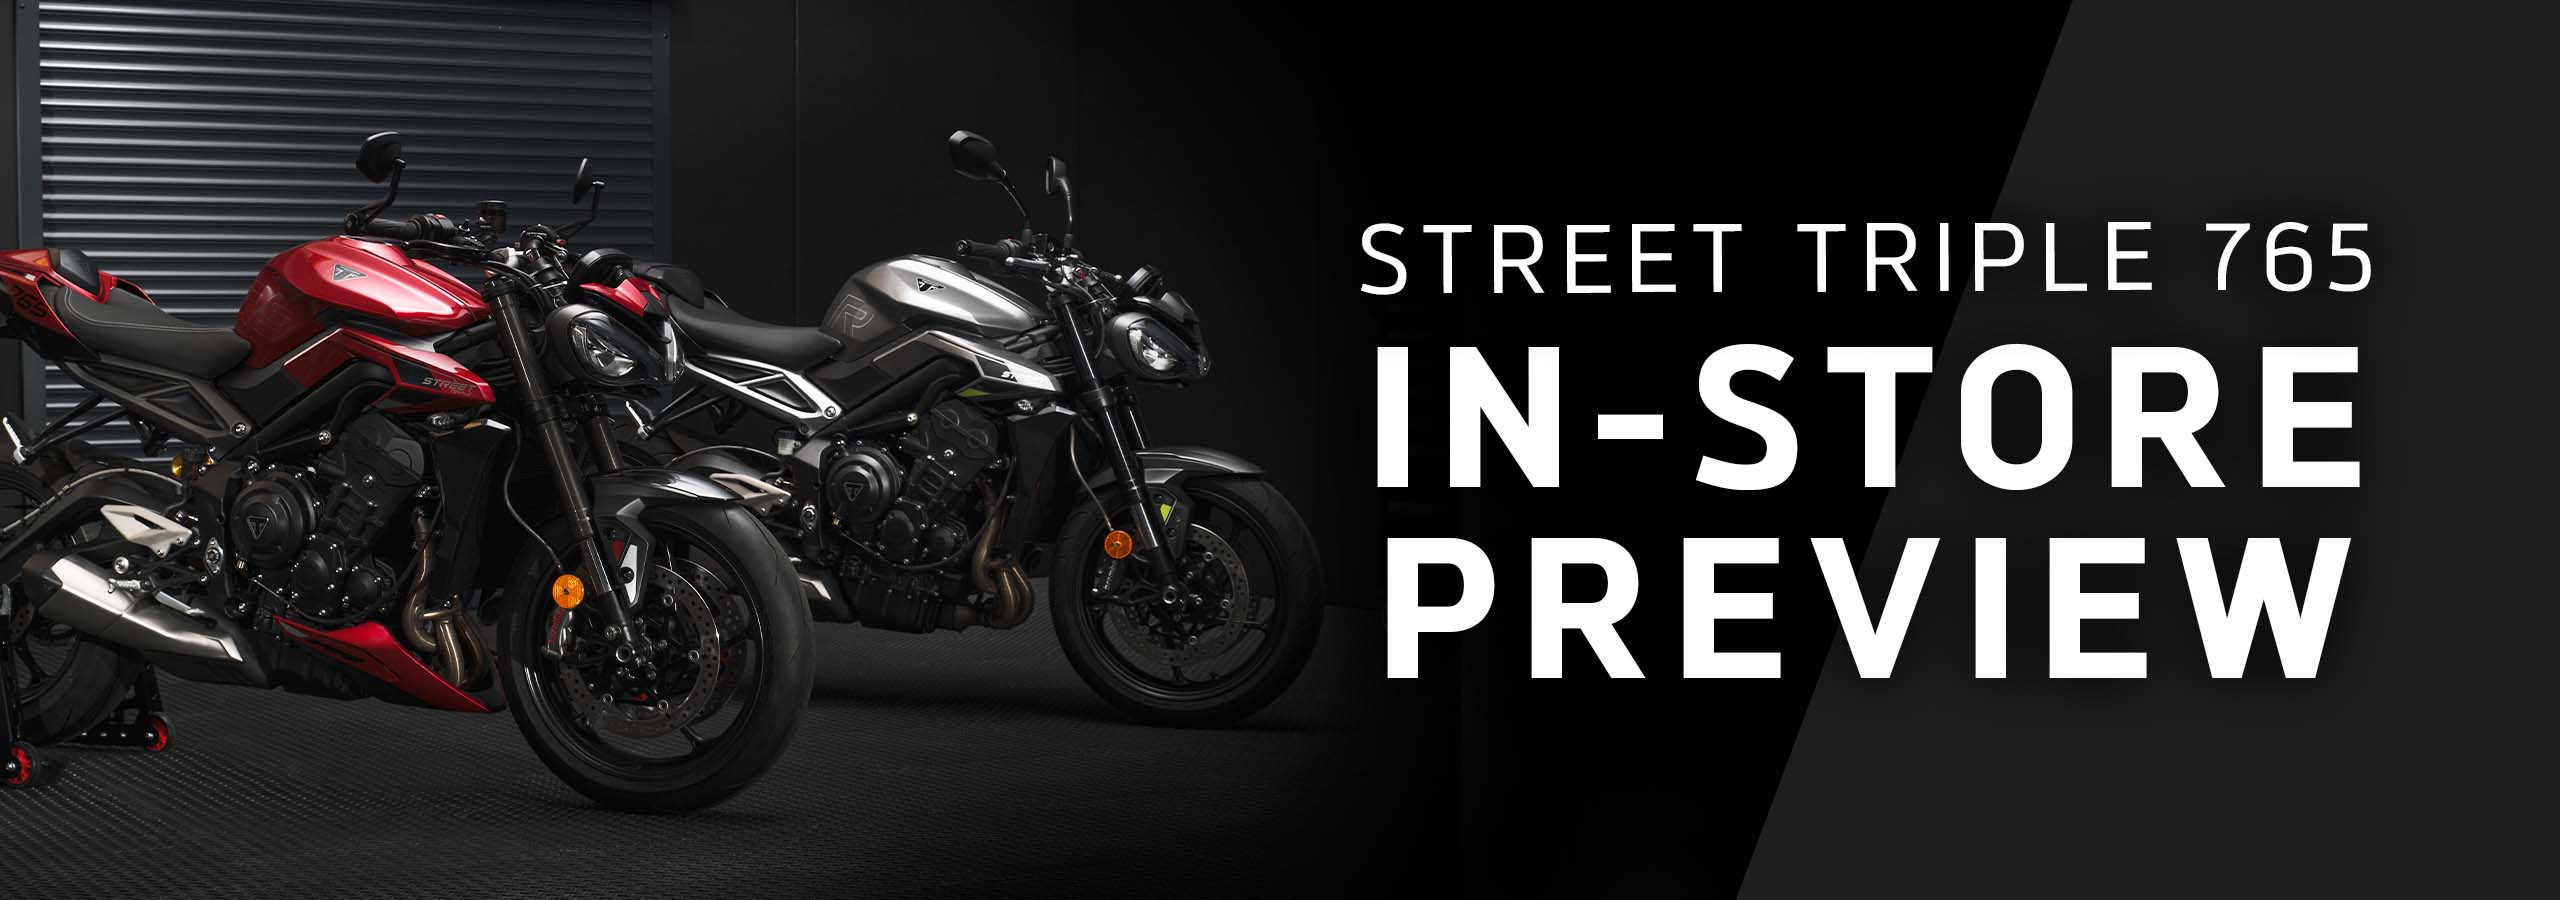 The Triumph Street Triple 765 R and RS will be at Laguna Triumph for one day only.